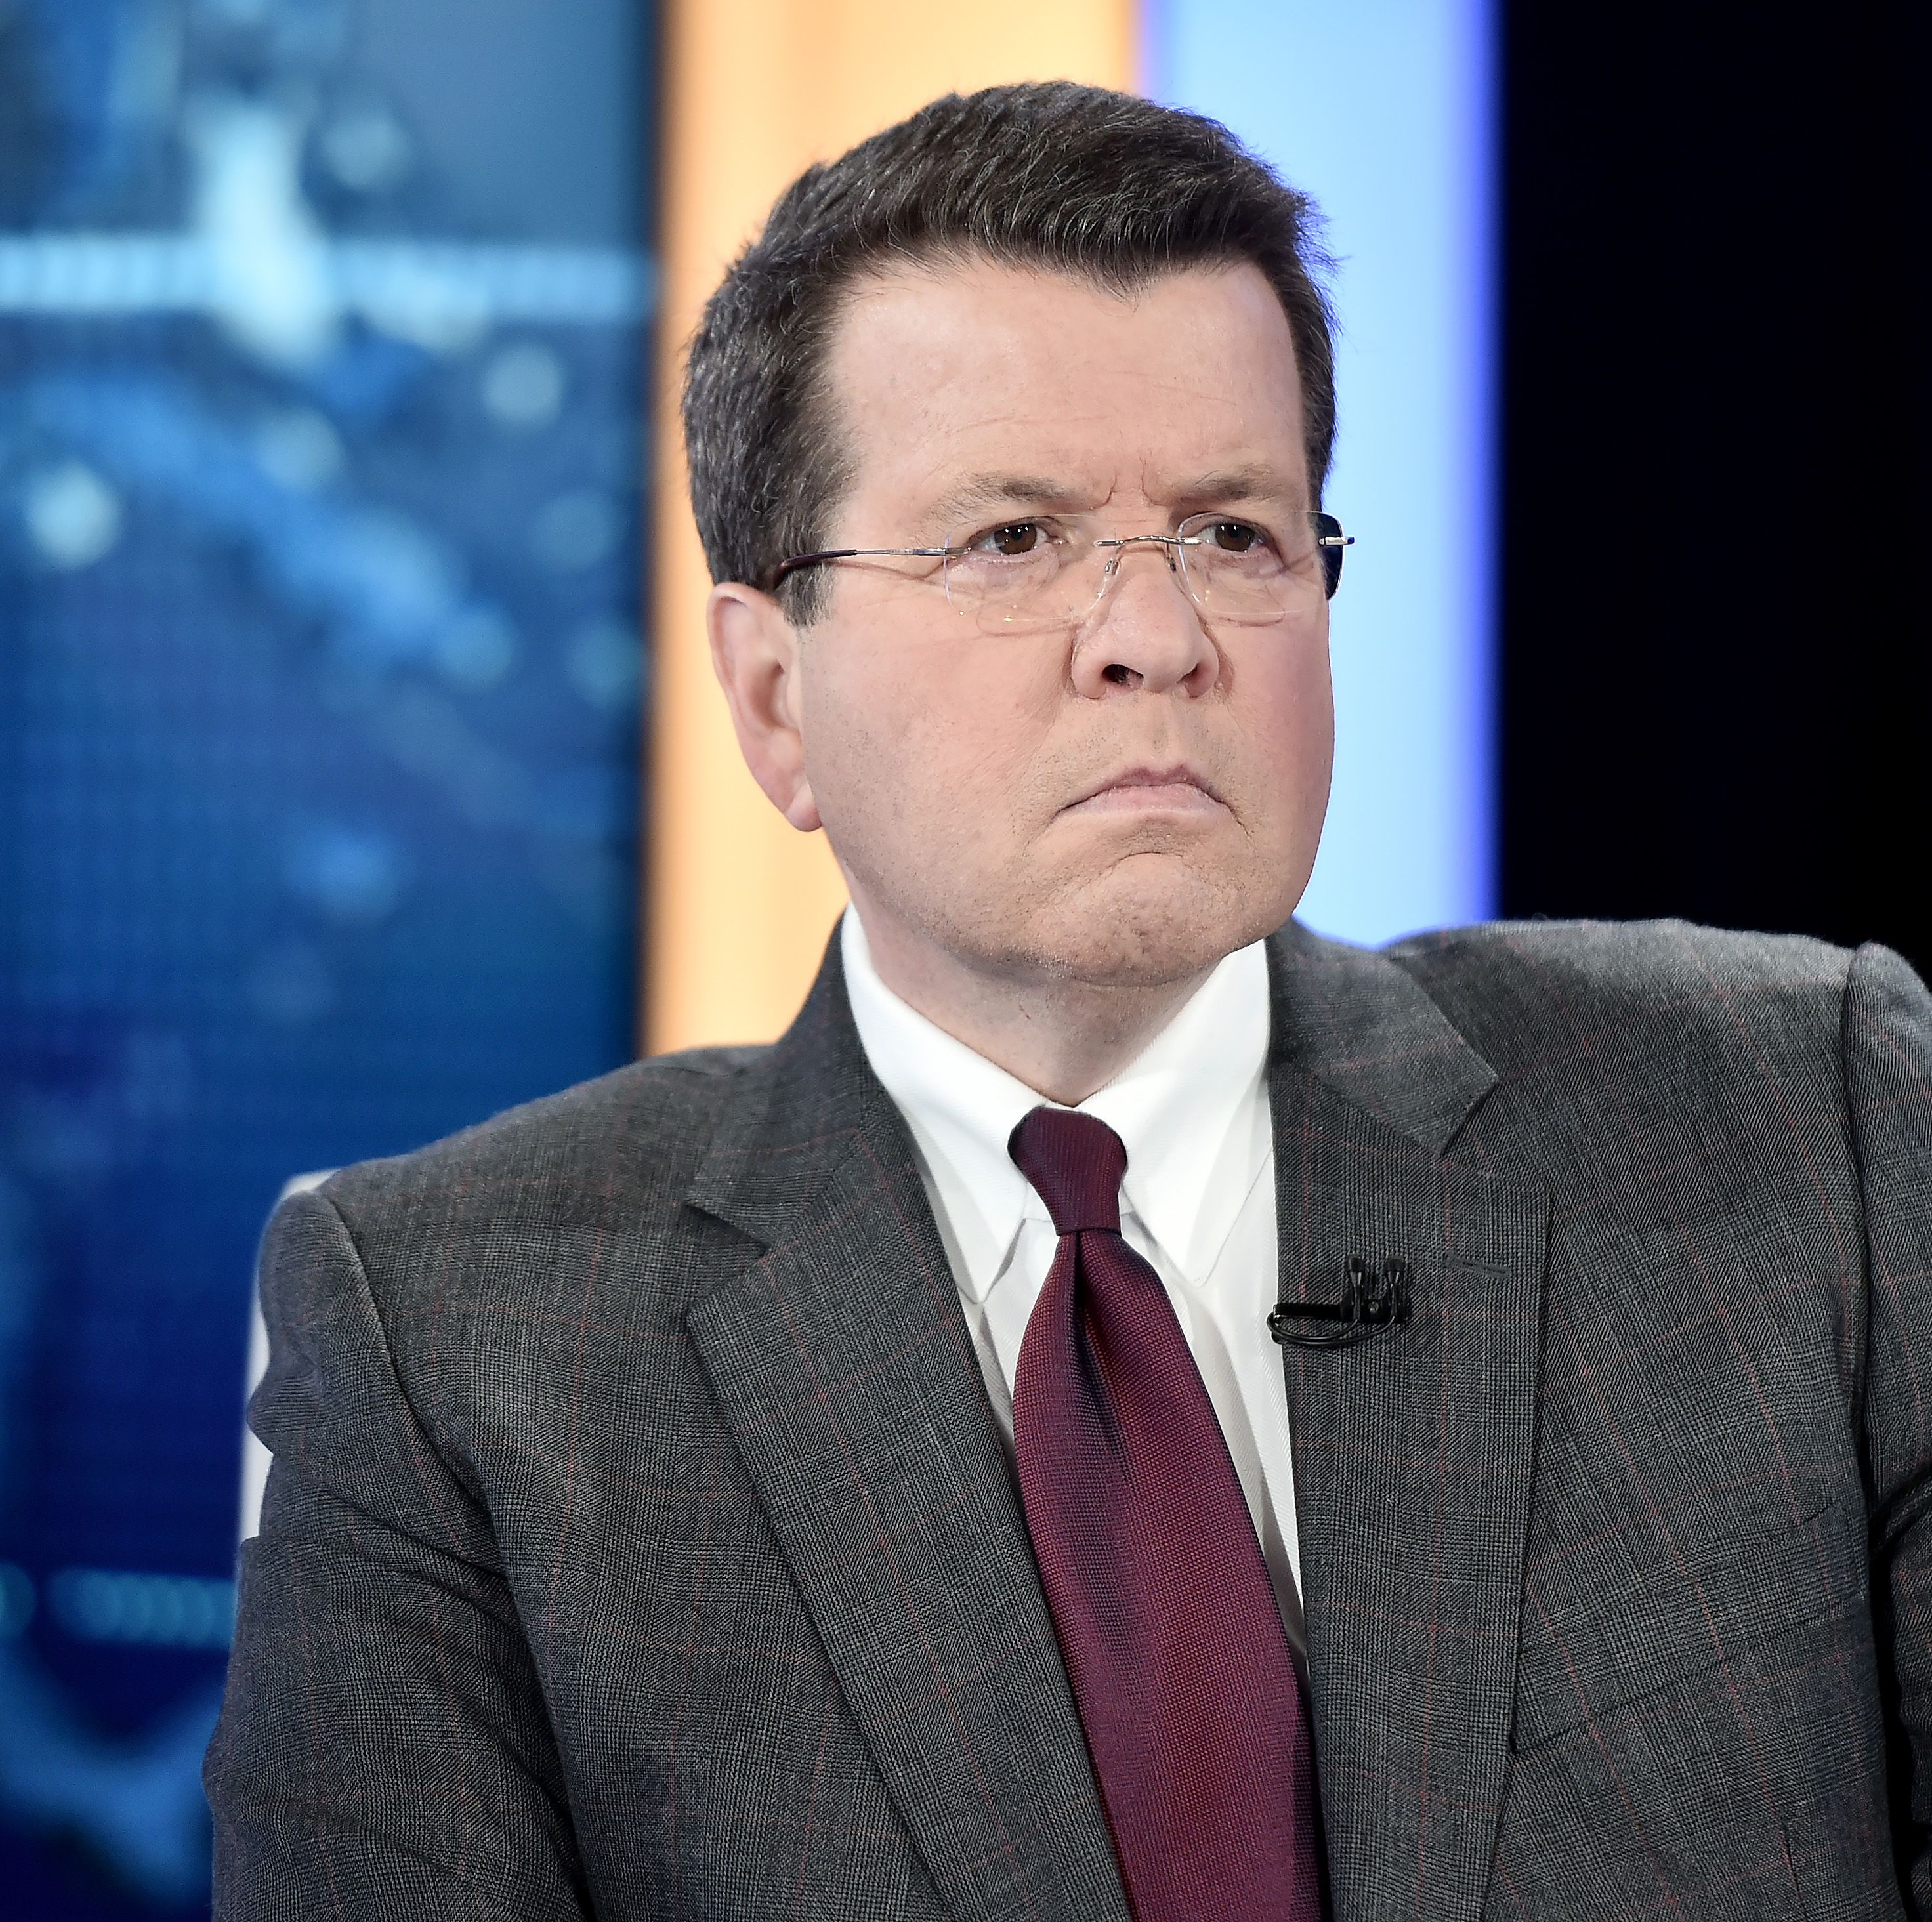 Fox News Host Neil Cavuto Tells Viewers 'Stop the Suffering' and Get Vaccinated